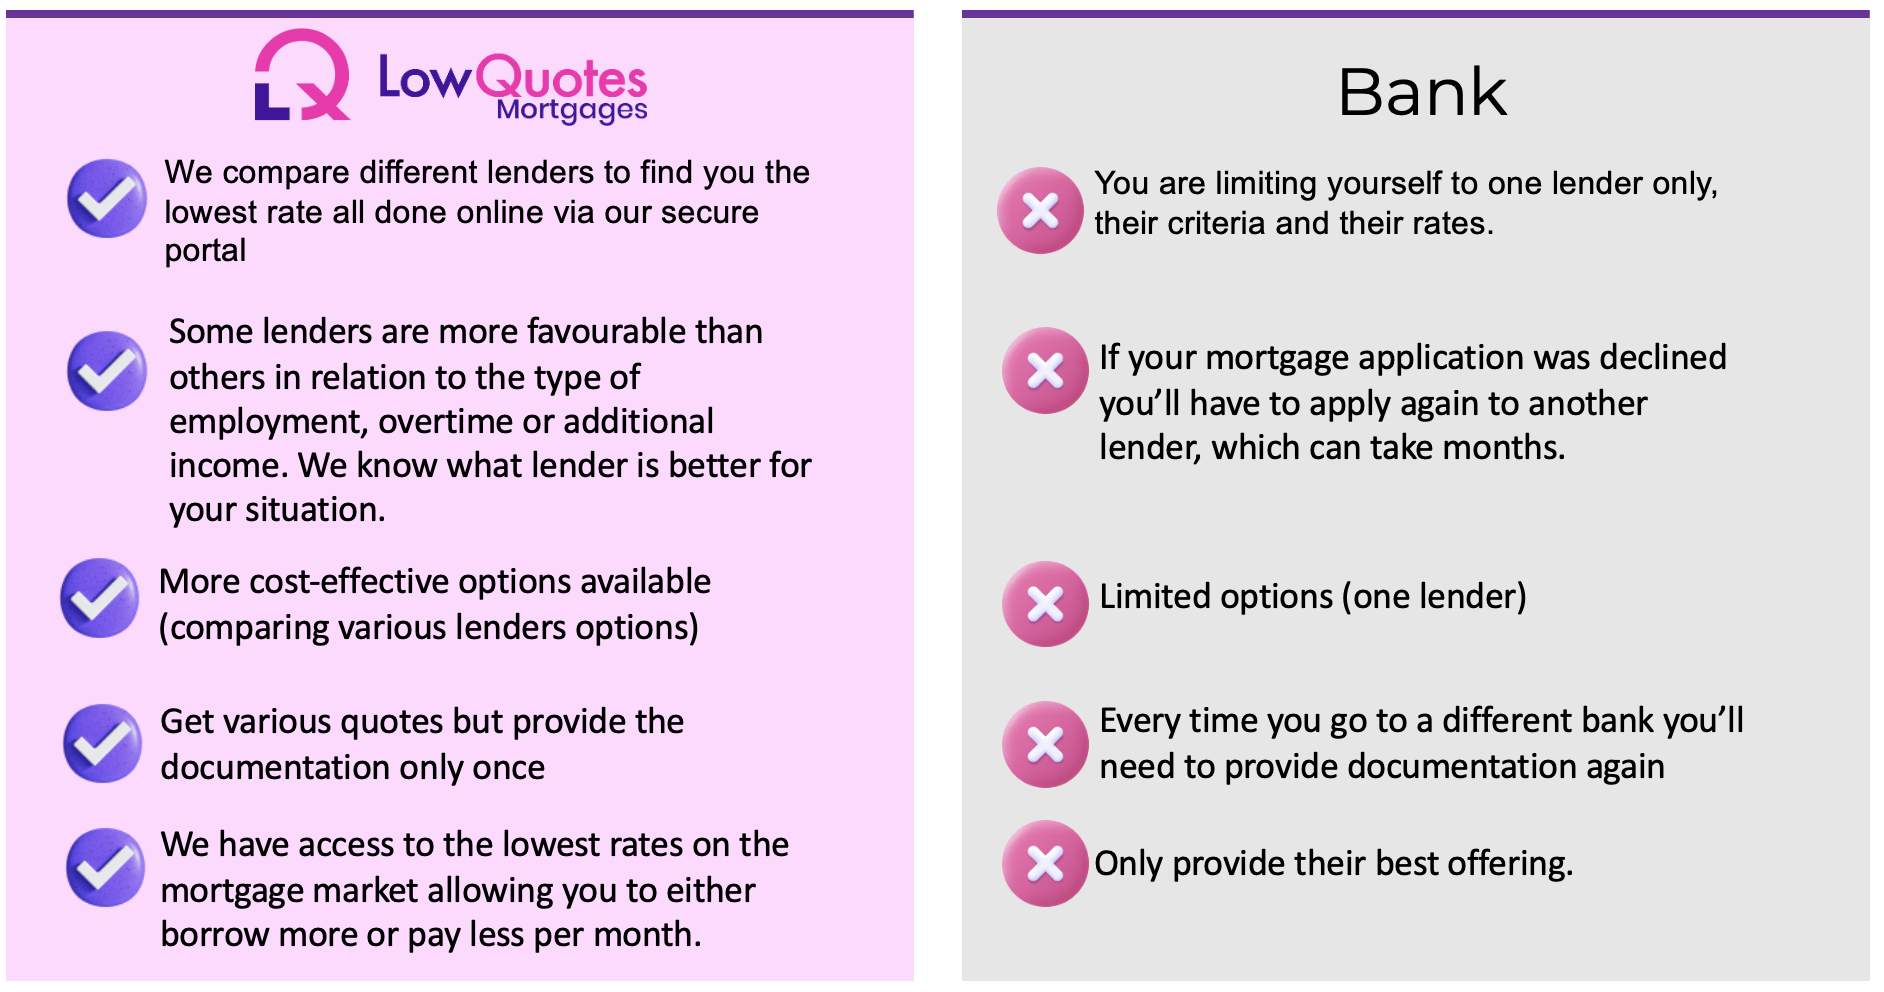 Difference between a Broker and a Bank for Mortgage in Ireland -LowQuotes